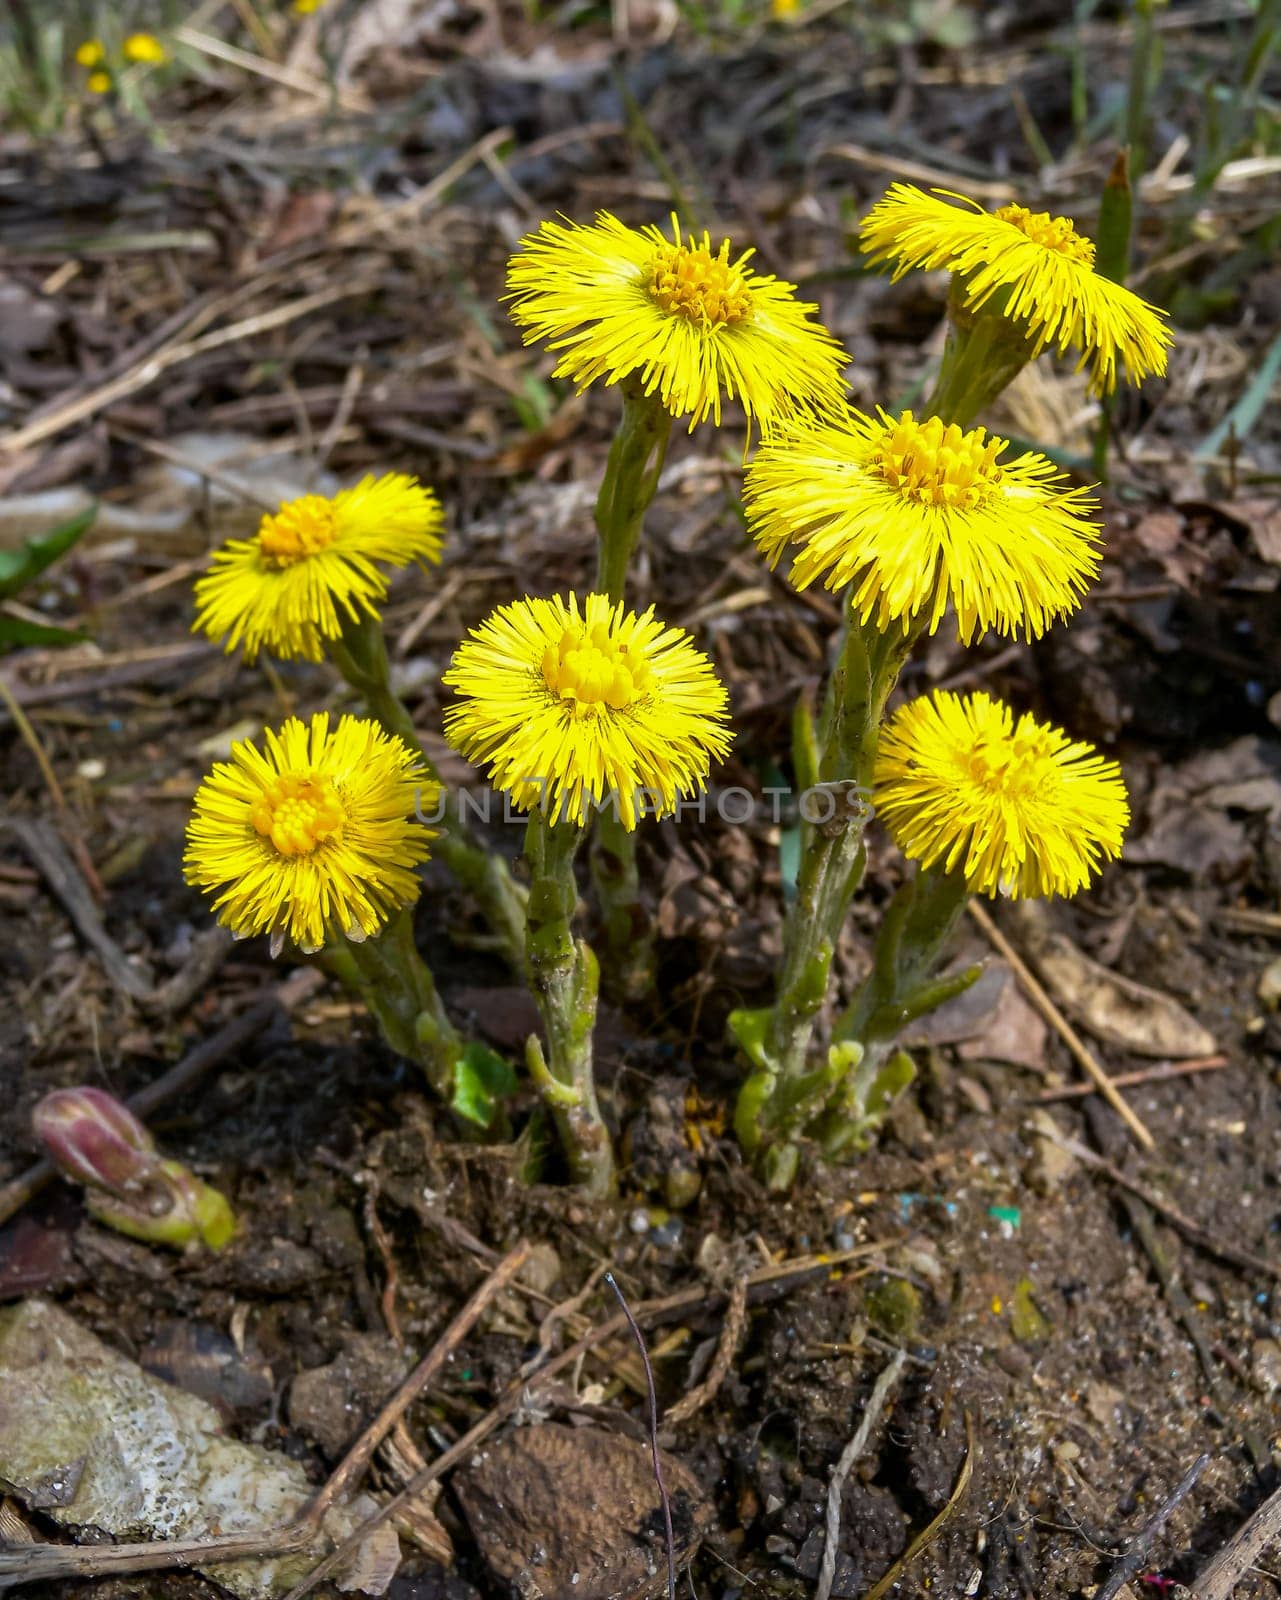 Coltsfoot (Tussilago farfara), a medicinal plant that blooms in early spring